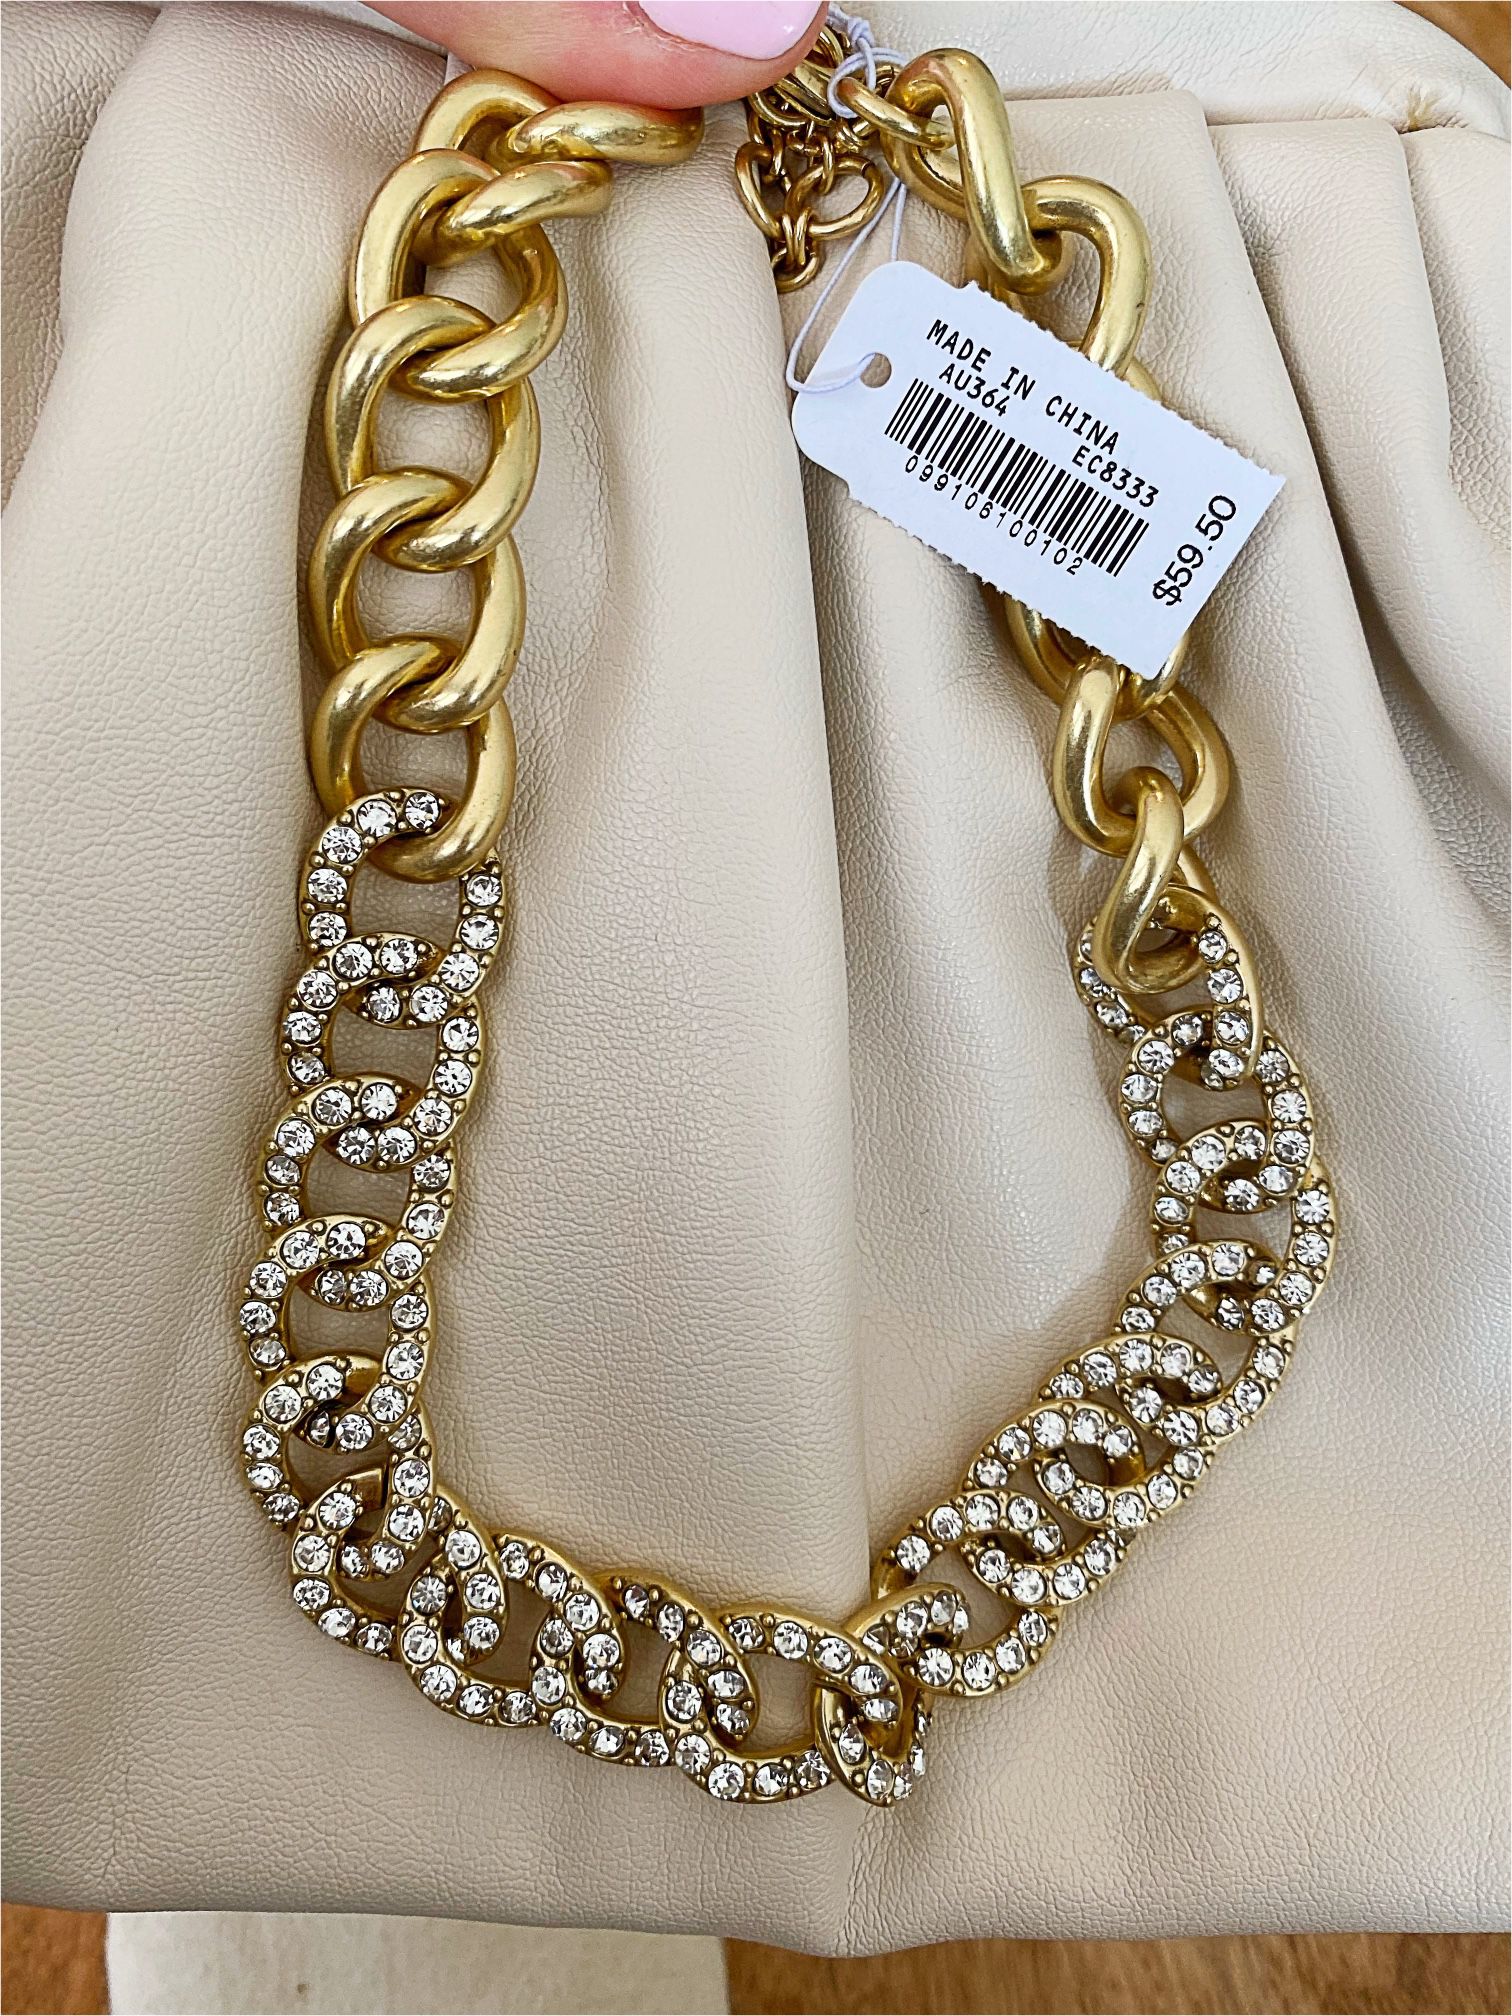 JCREW PAVE LINK NECKLACE NEW SOLD OUT